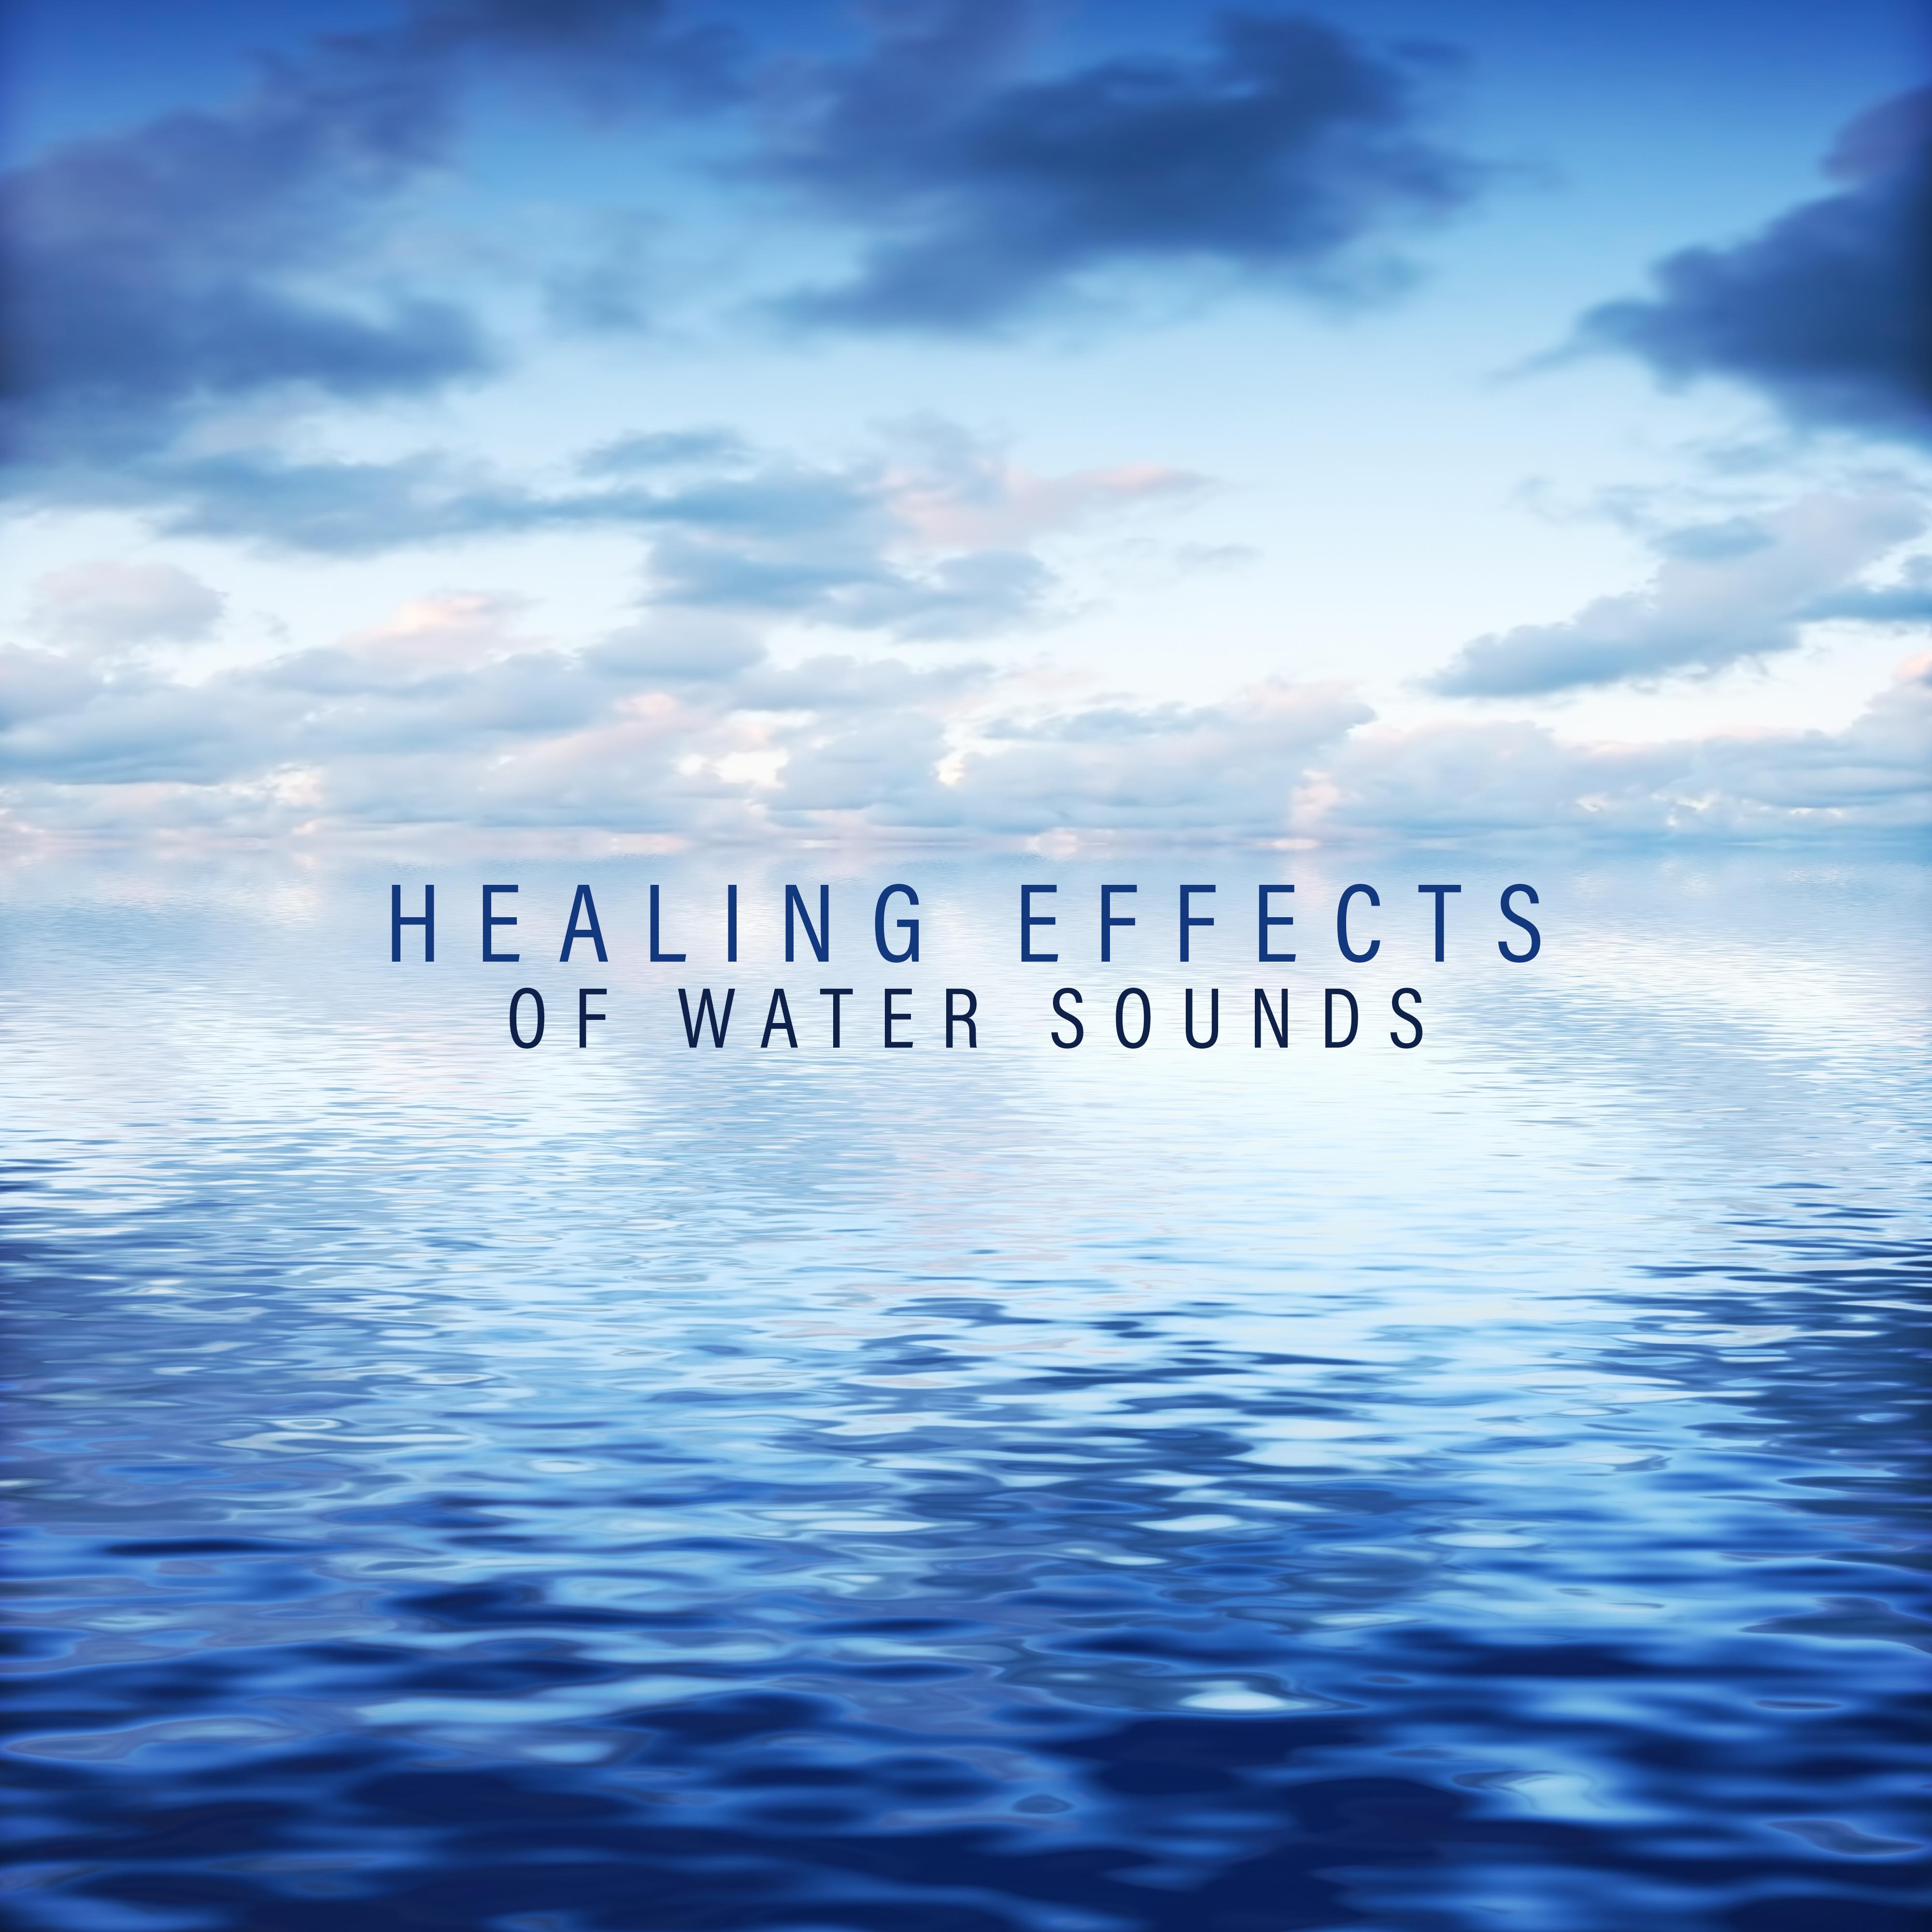 Healing Effects of Water Sounds: 2019 New Age Nature Music for Total Relaxation, Therapy Sounds, Inner Peace Melodies, Stress Relief